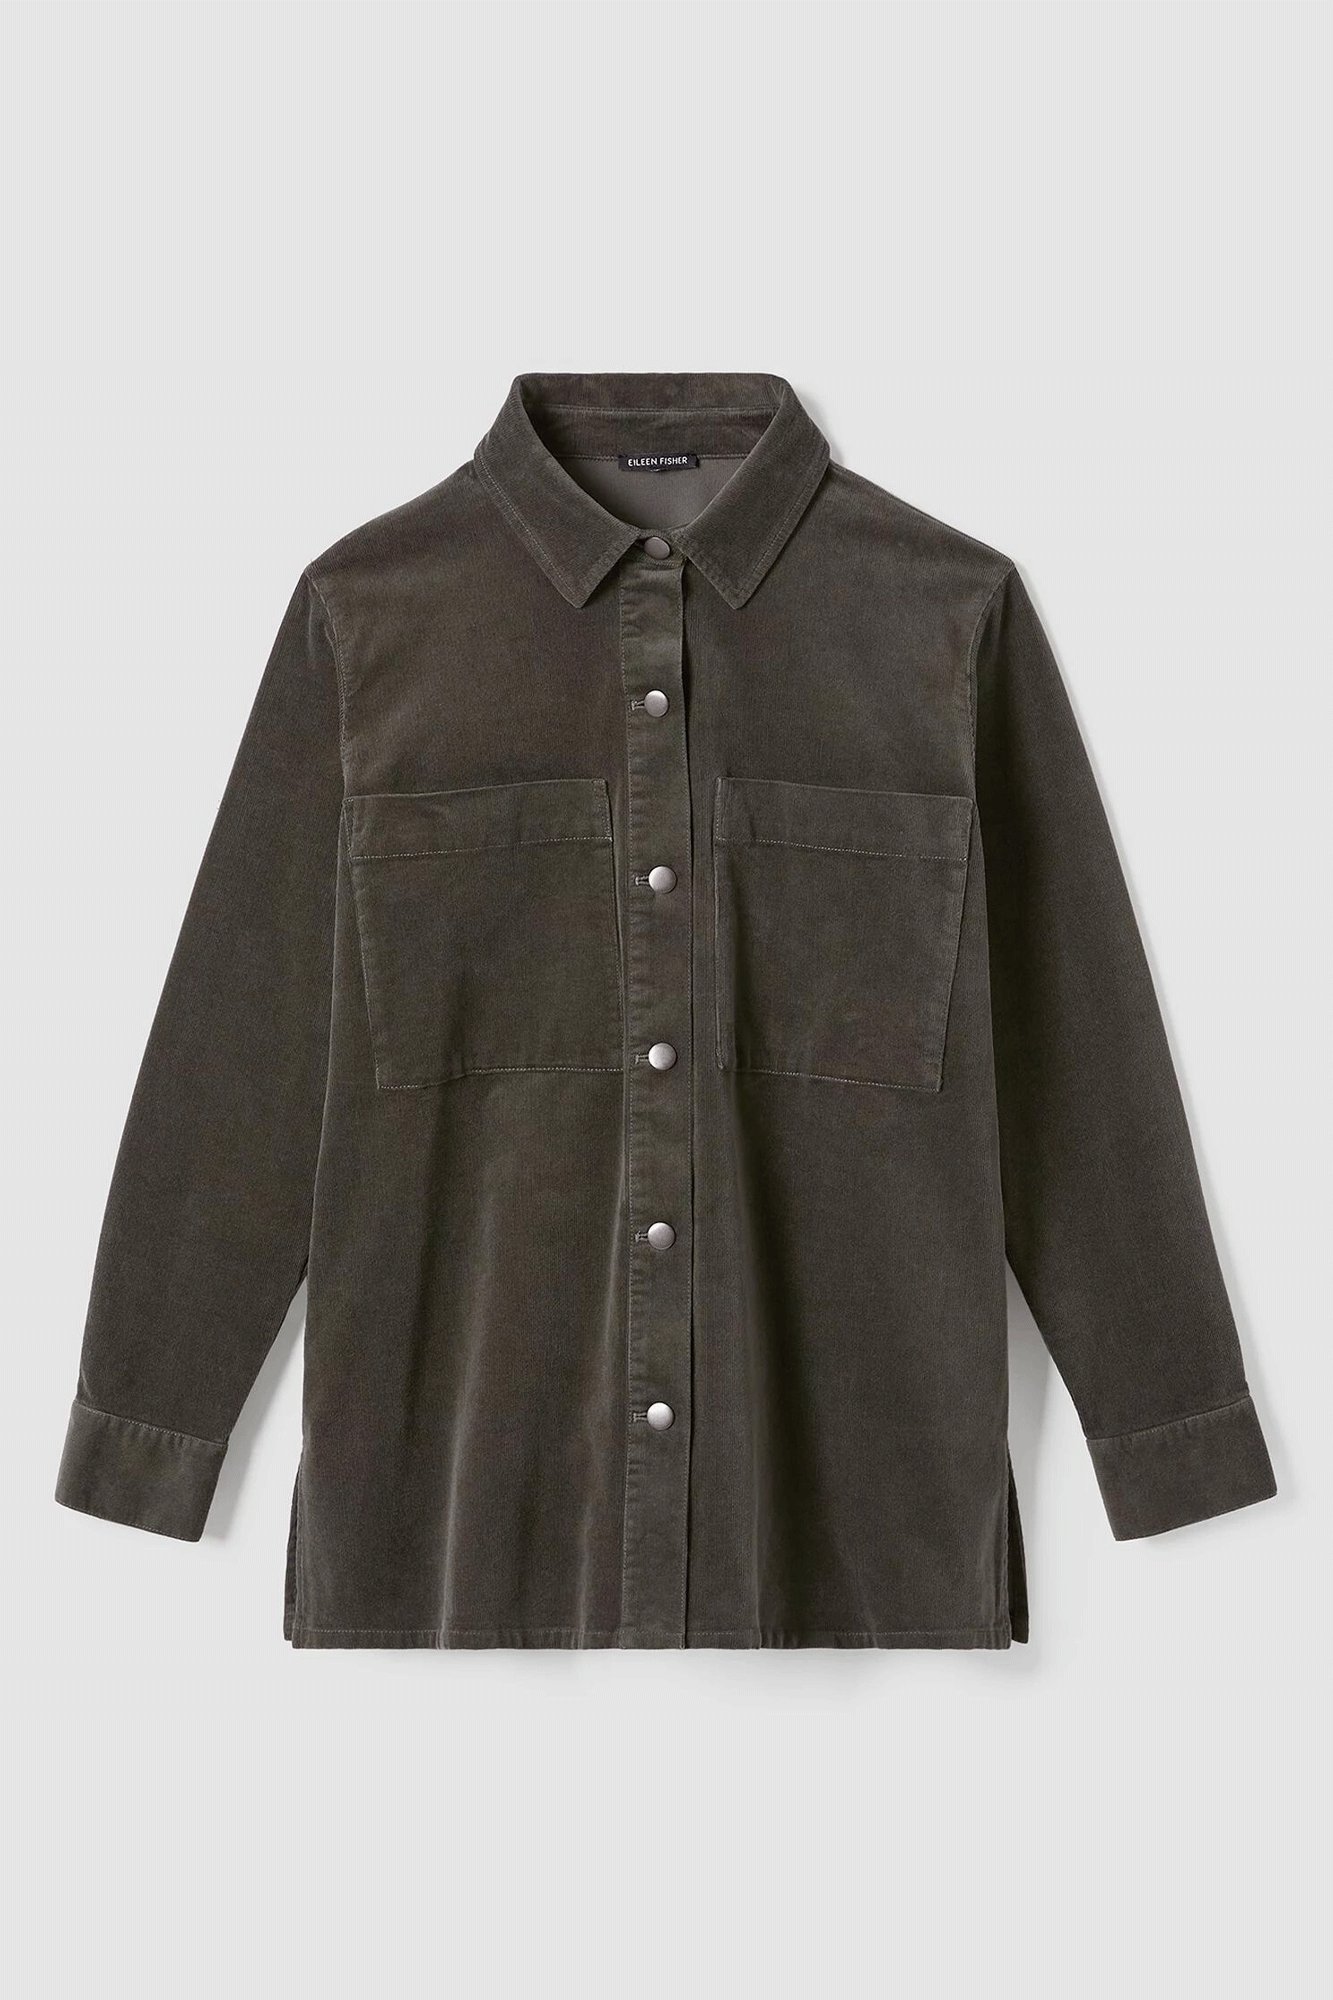 This classic collar shirt jacket from Eileen Fisher is made from corduroy and features a hint of stretch for a comfortable fit. With front patch pockets and a relaxed fit, it offers the style of a jacket with the convenience of a shirt. Perfect for everyday wear.